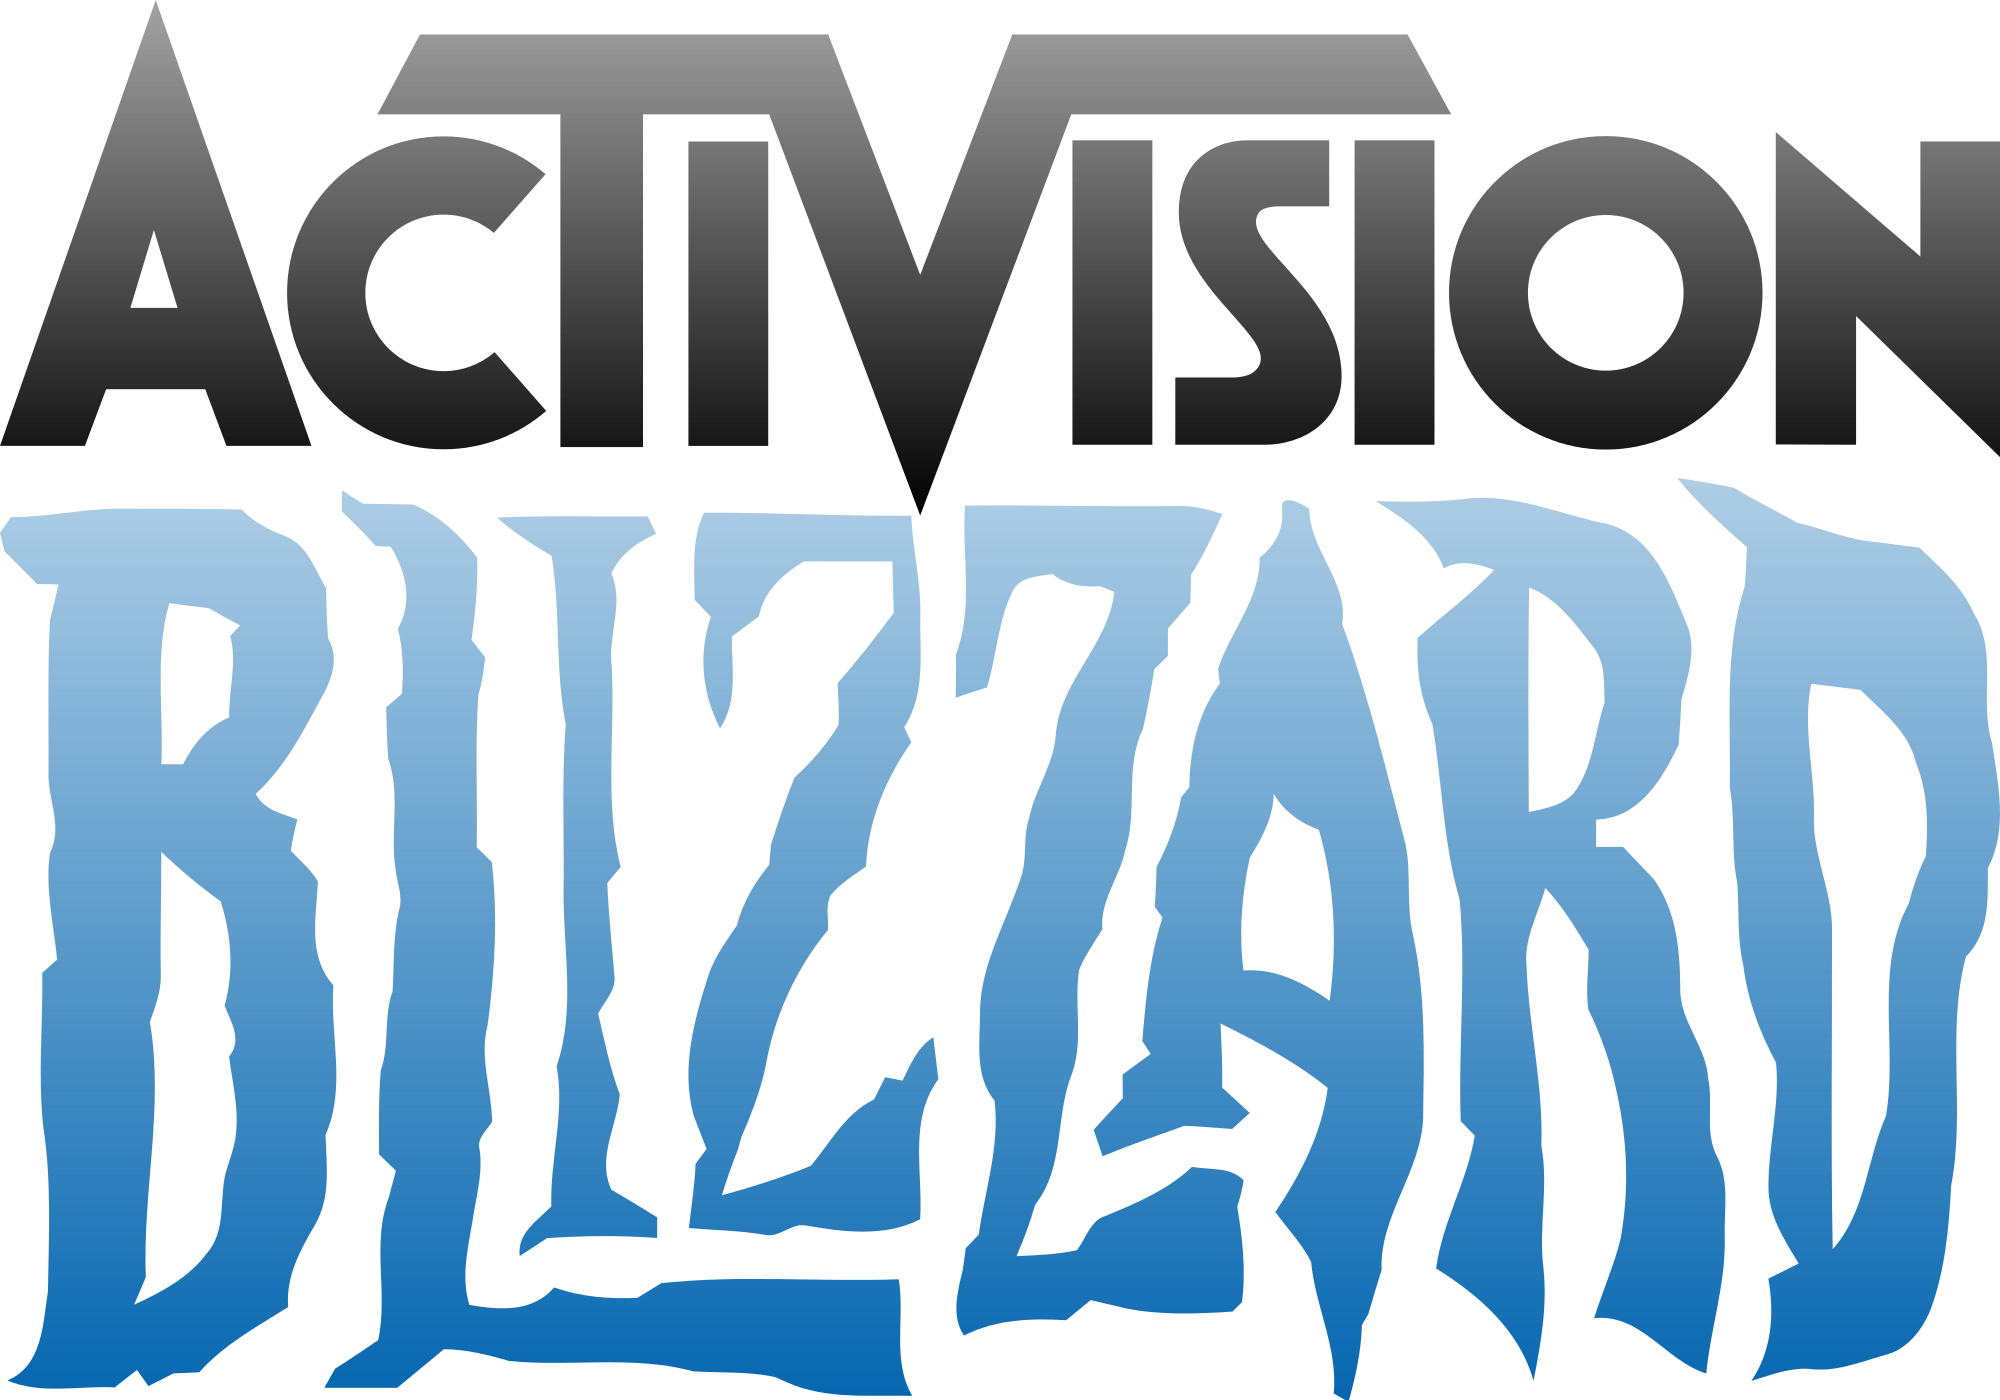 Blizzard svg #15, Download drawings